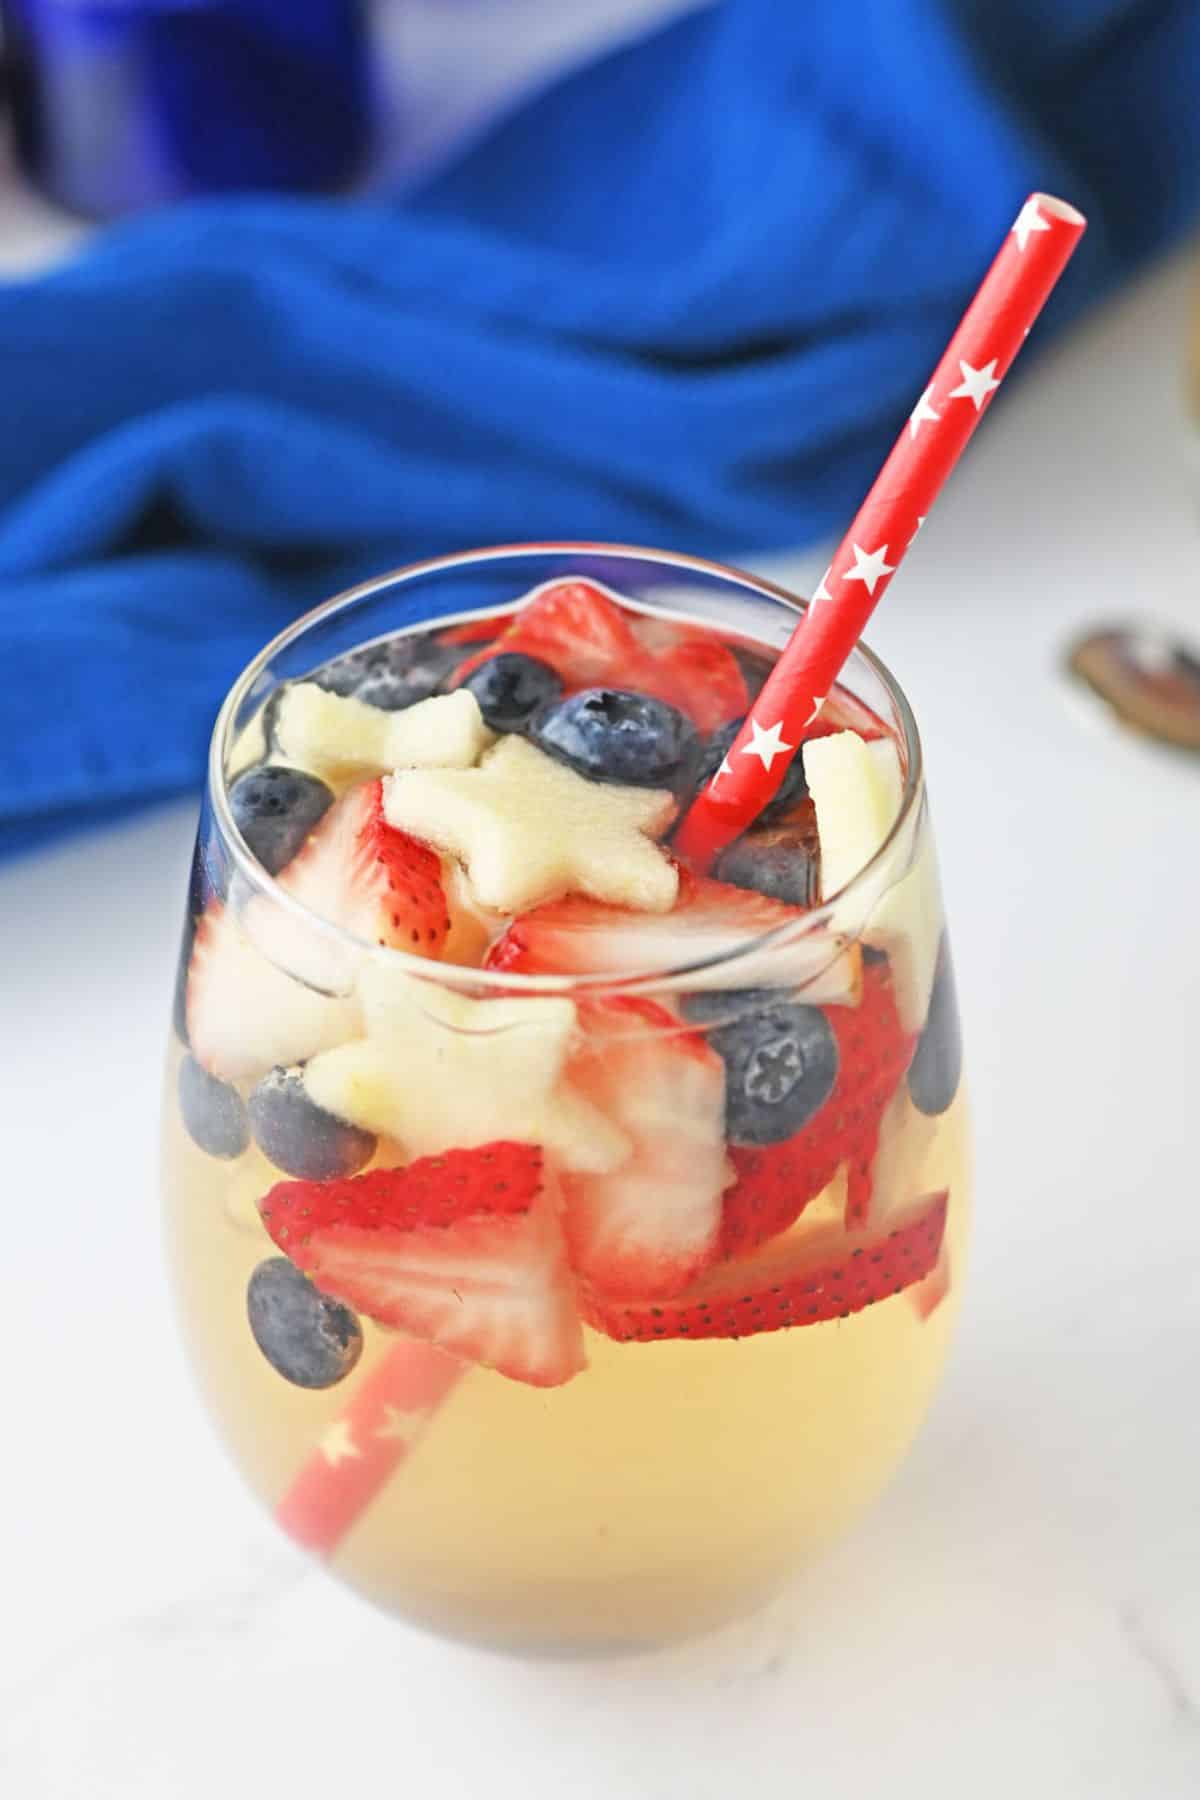 stemless wine glass with red white and blue fruit